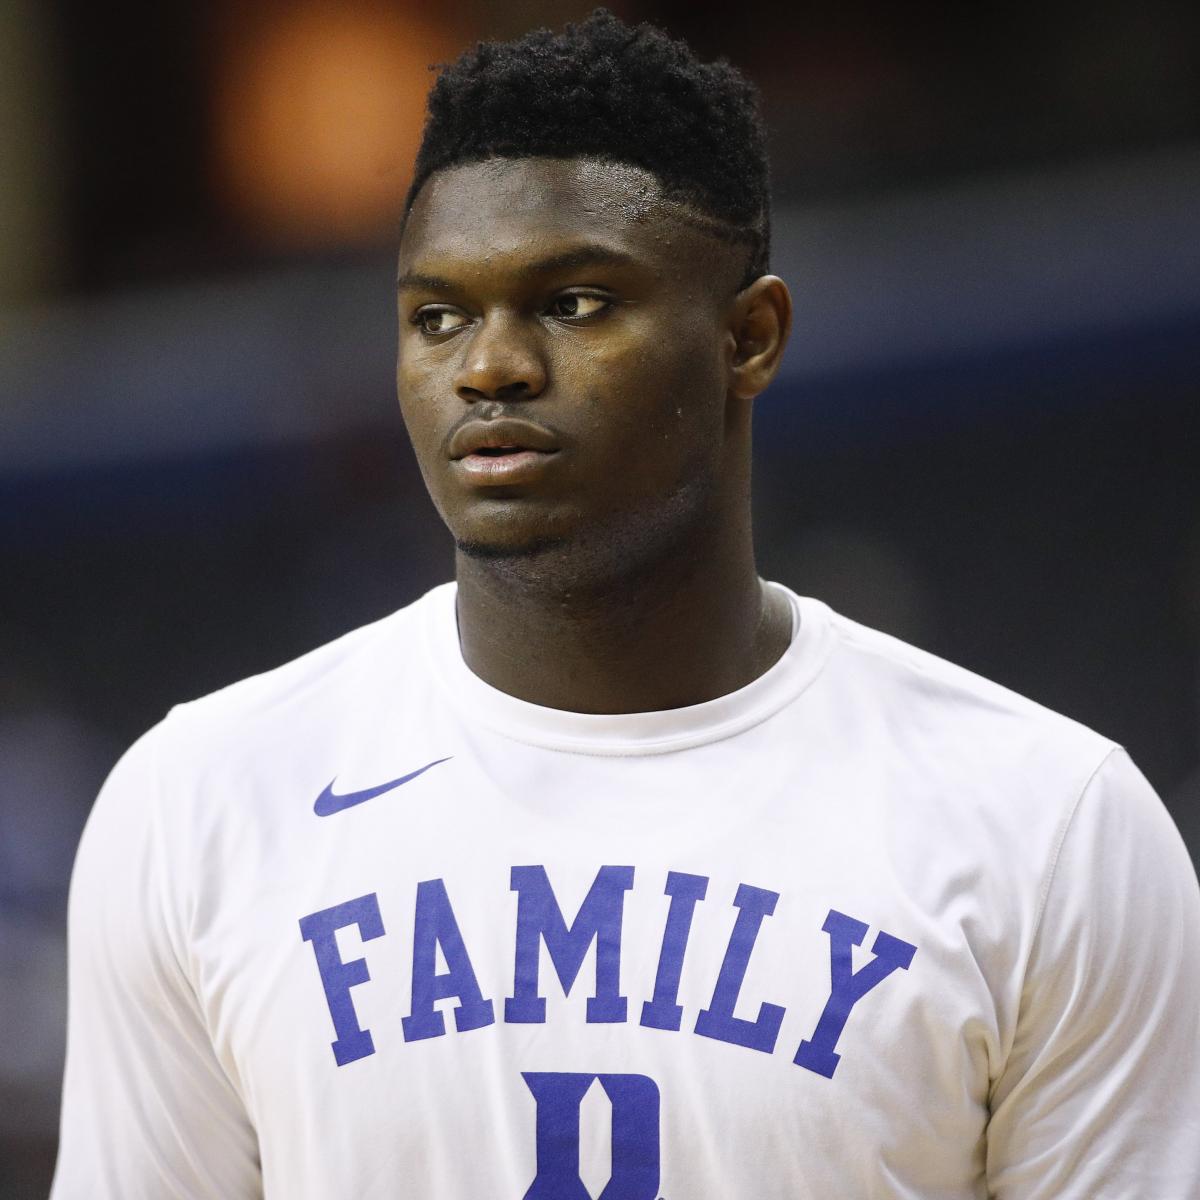 Video: Zion Williamson Wears Nike Kyrie 4s Amid Speculated Endorsement Deal | Bleacher ...